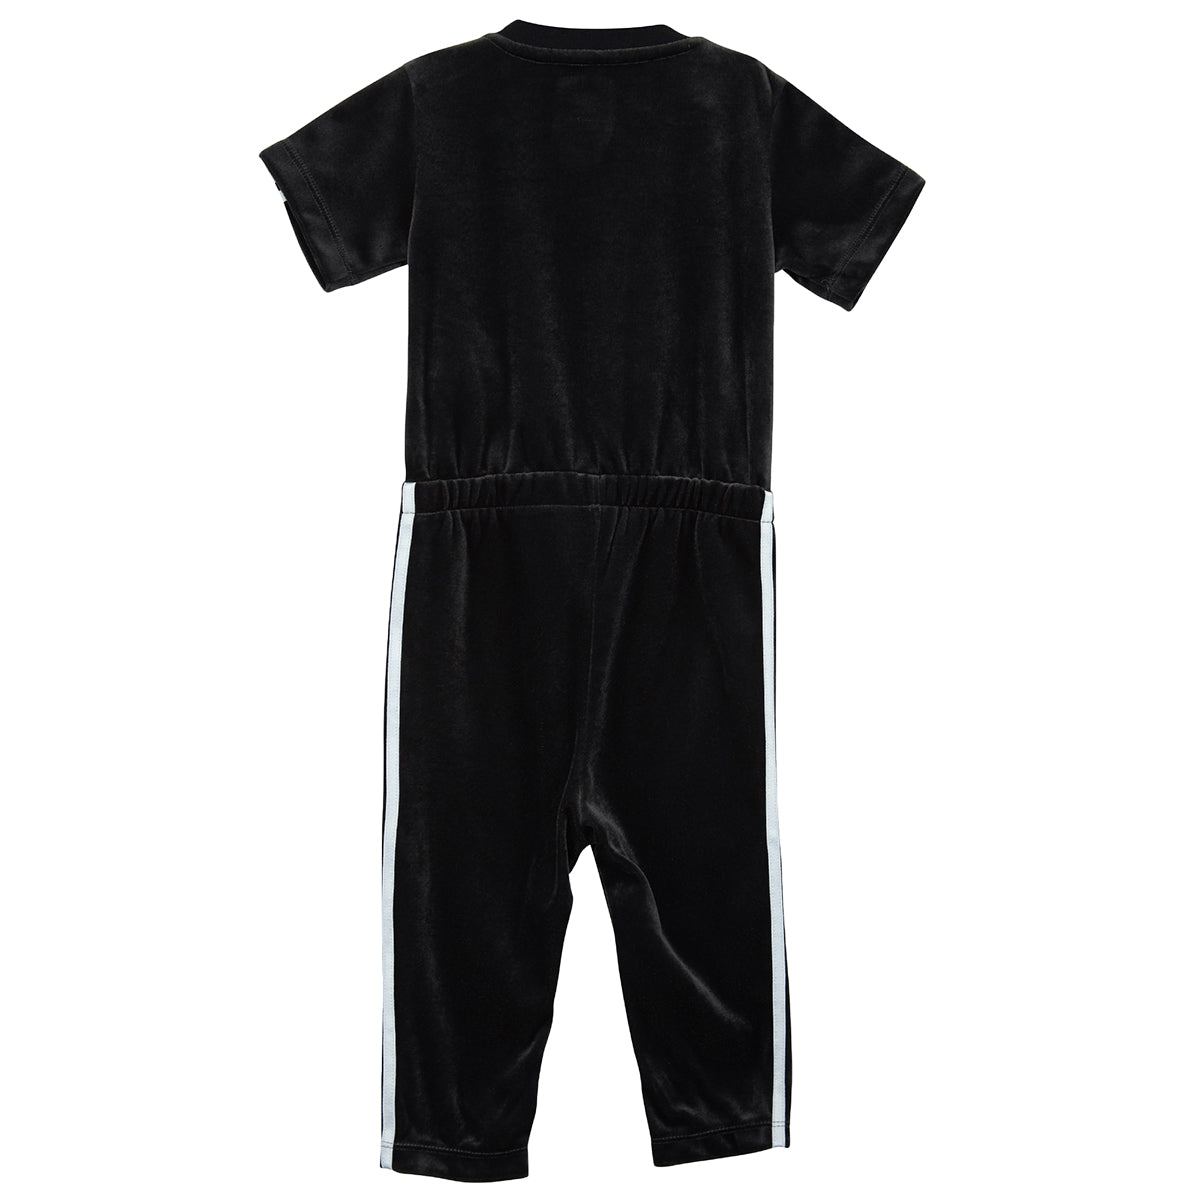 Adidas Infant Velour Jumpsuit Toddlers Style : Bq4446